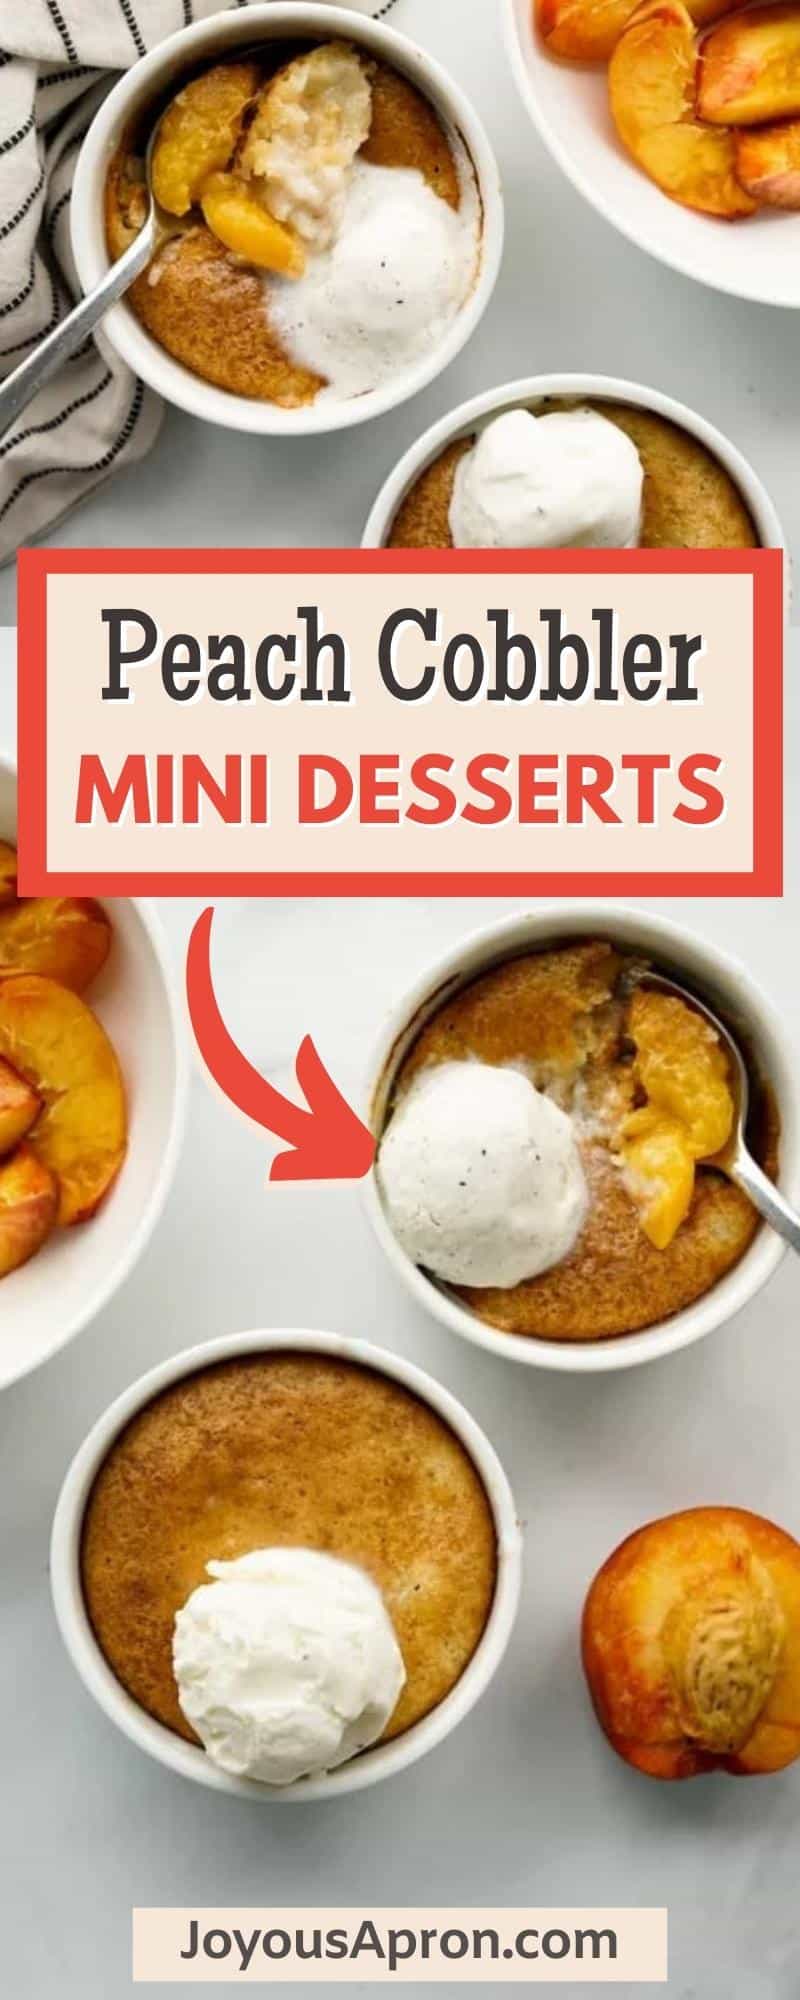 Individual Mini Peach Cobbler - juicy peaches topped with a caramelized cake topping and served with vanilla ice cream. A delicious light dessert made in a small ramekin for an individual serving! via @joyousapron